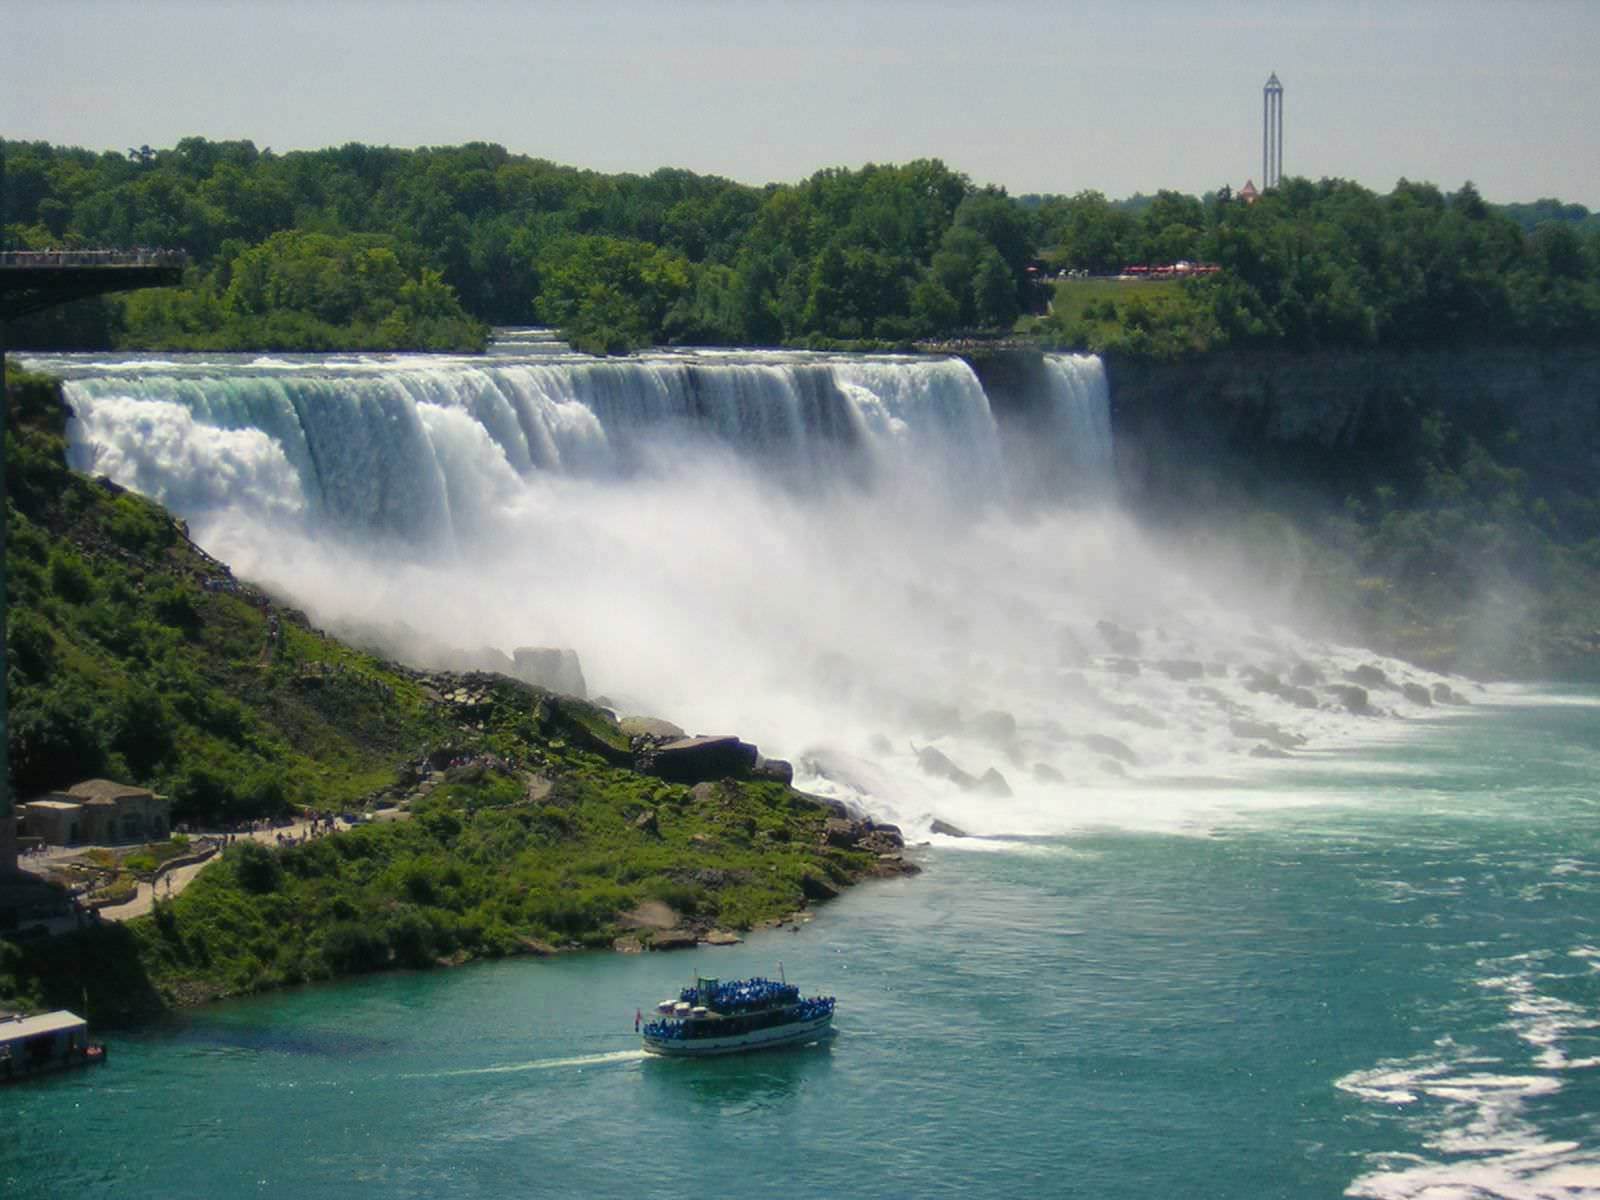 Niagara Falls American-Side Tour with Maid of the Mist Boat